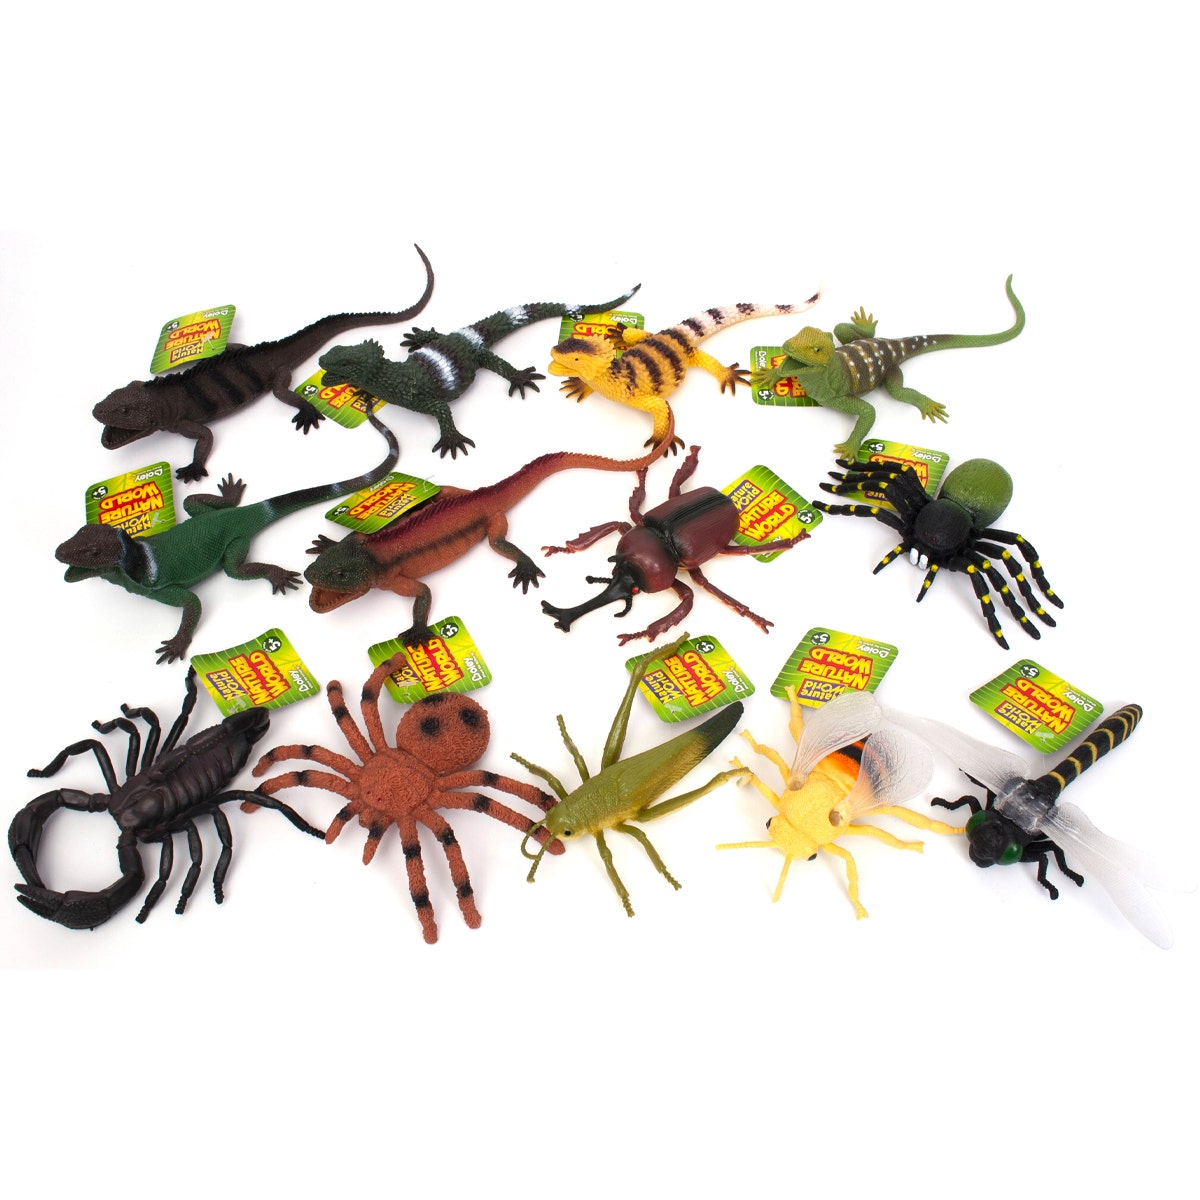 12pc Bugs, Spiders, Lizards – Nature World Plastic Toy Assortment